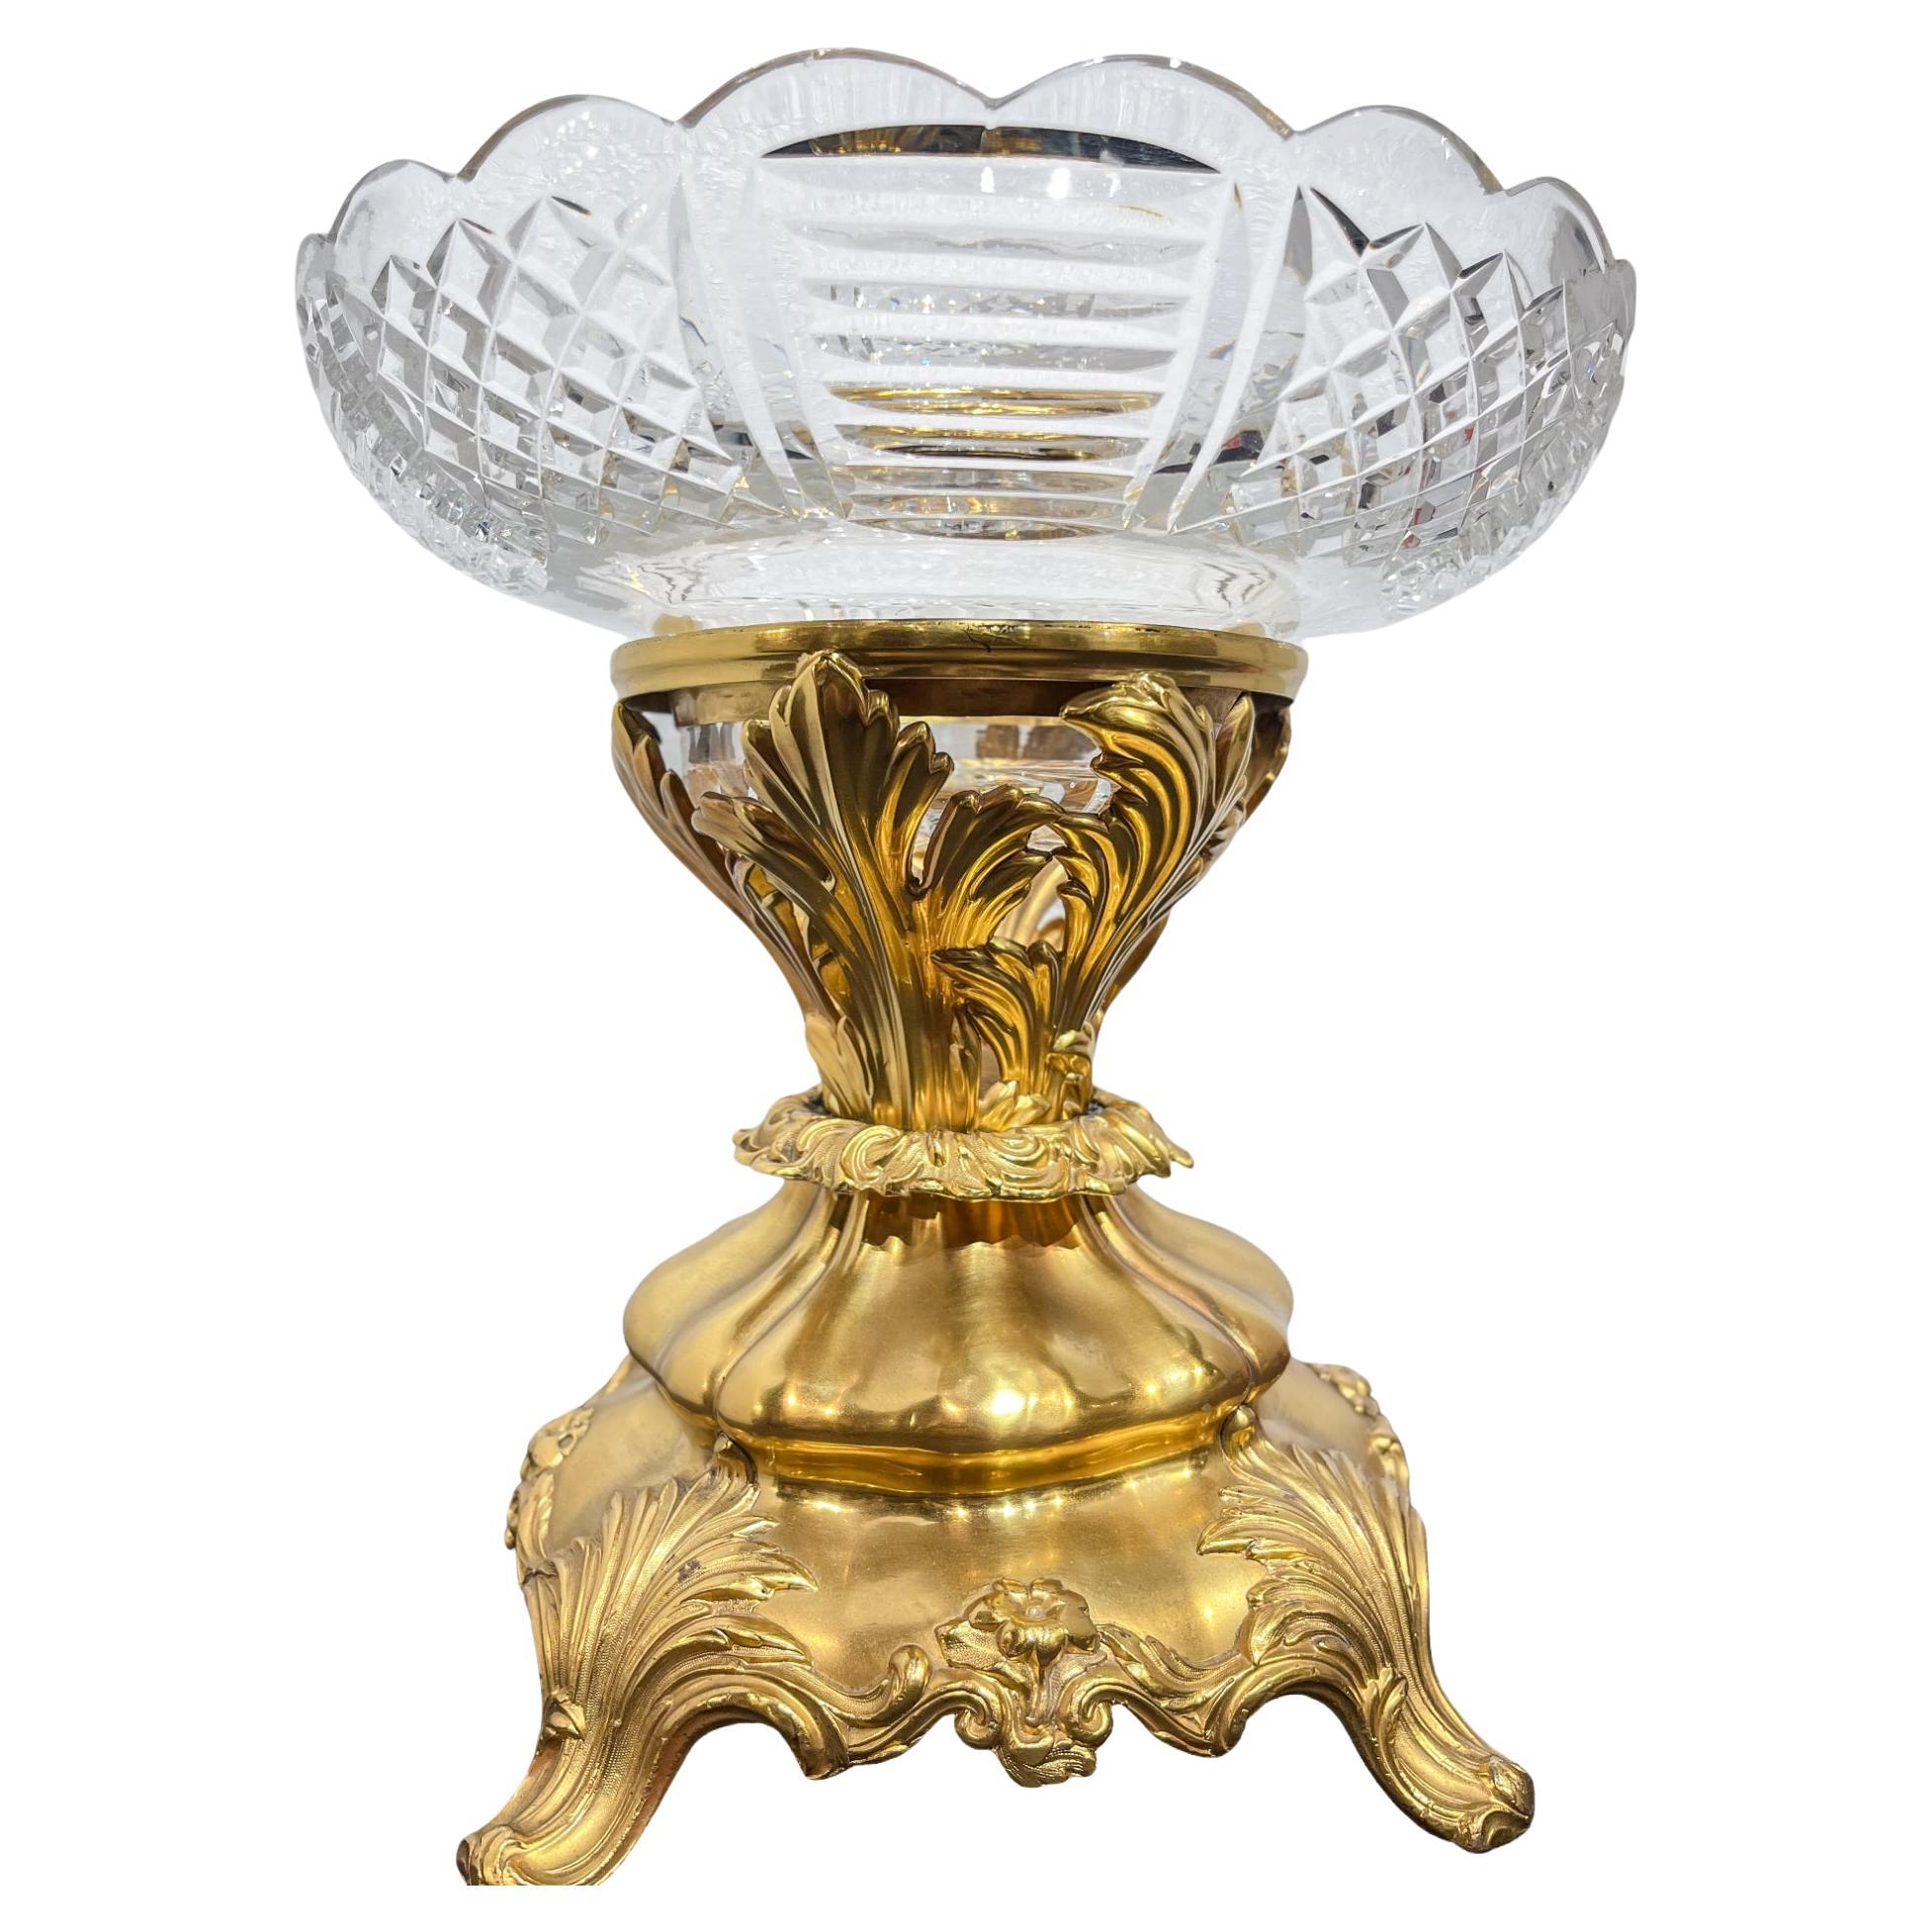 Rococo Style Molded Glass and Gilt-Metal Footed Bowl